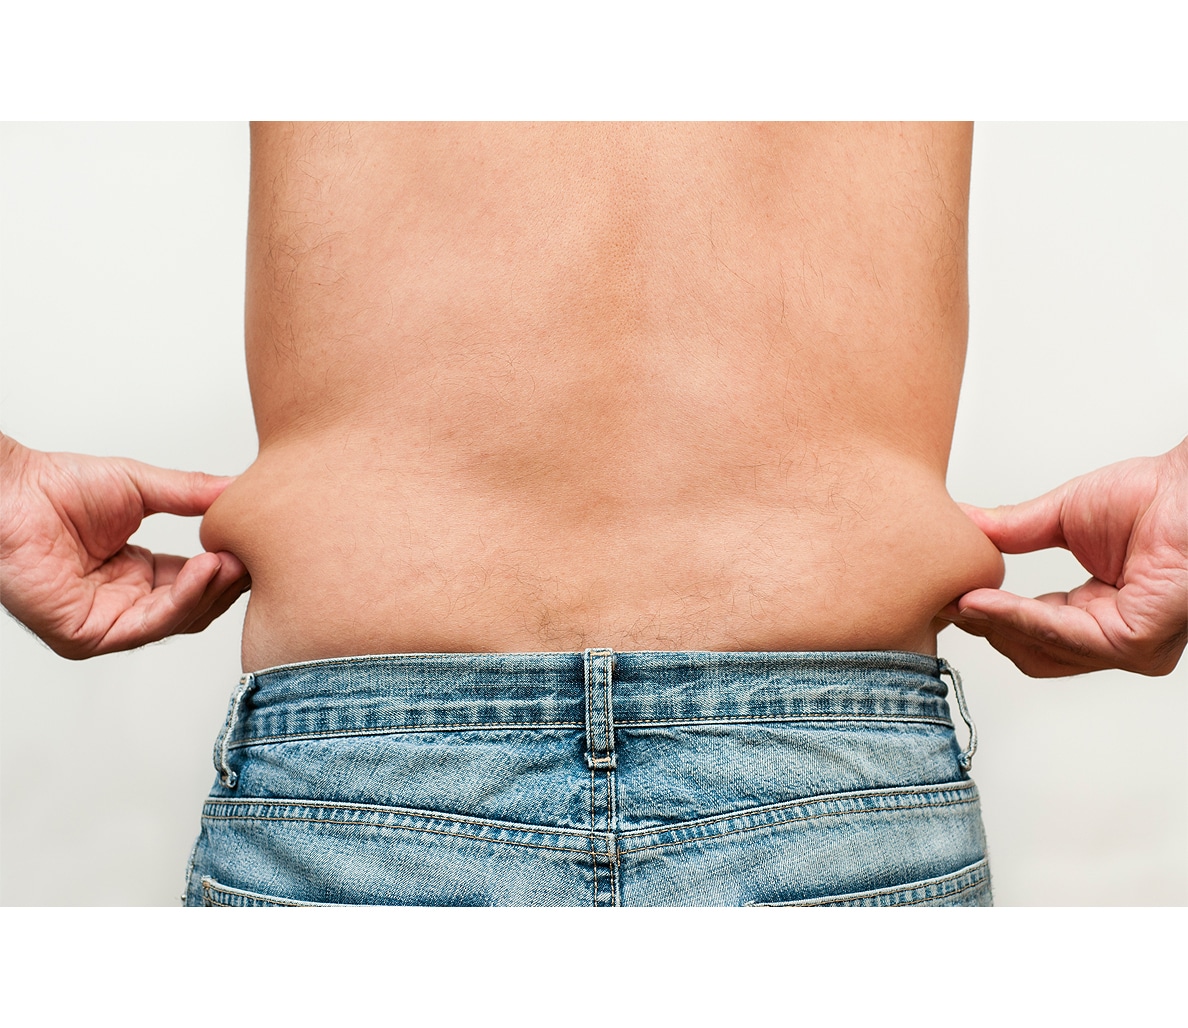 Can You Get Rid of Loose Skin After Major Weight Loss?